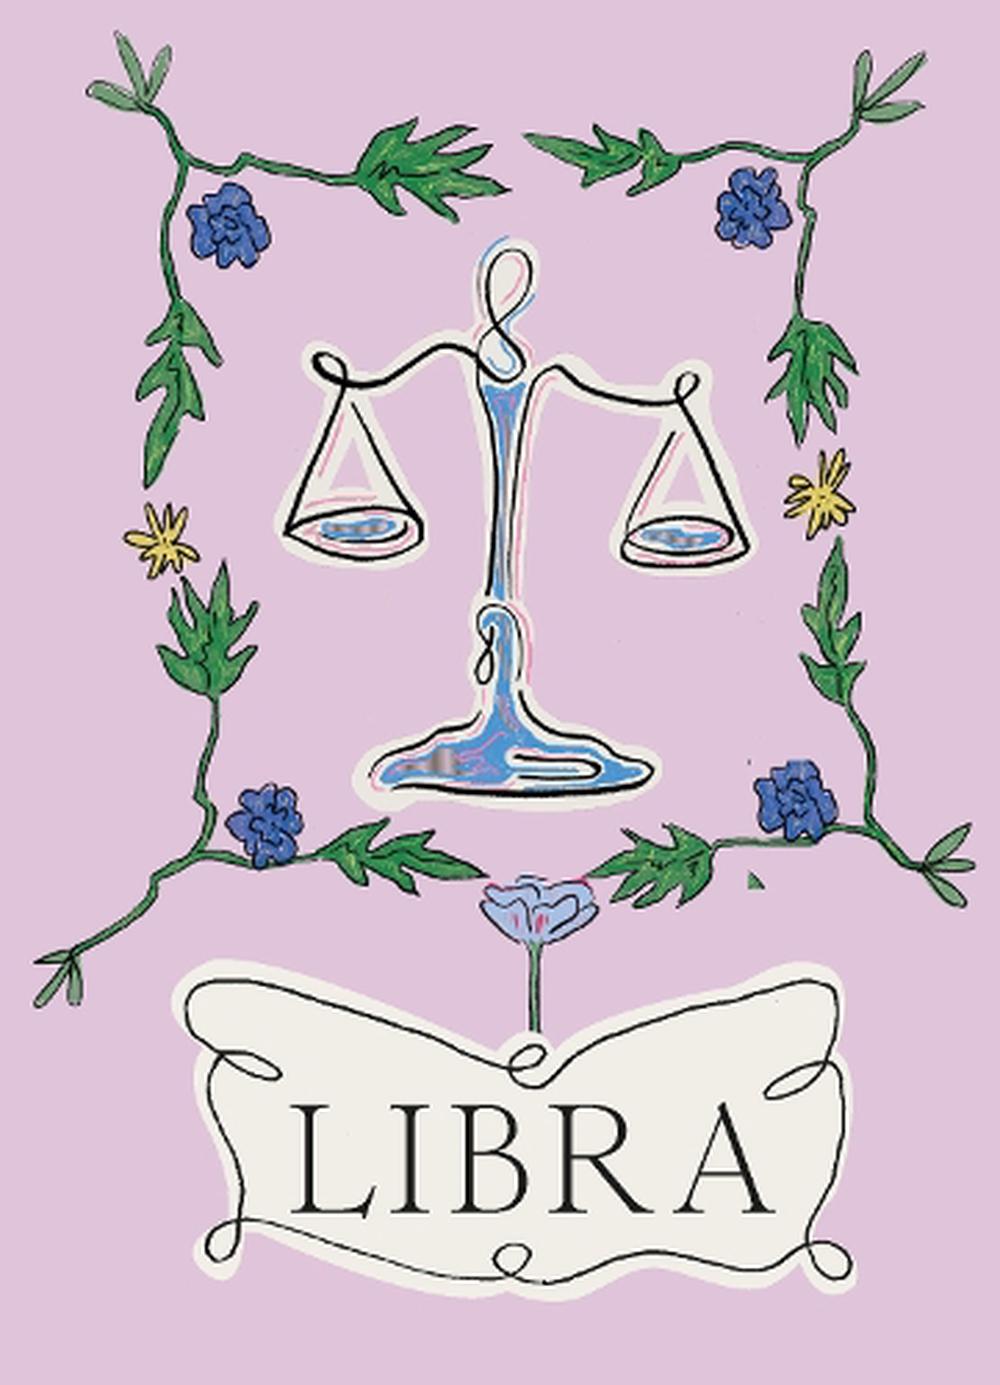 Libra by Liberty Phi, Hardcover, 9781914317996 | Buy online at The Nile